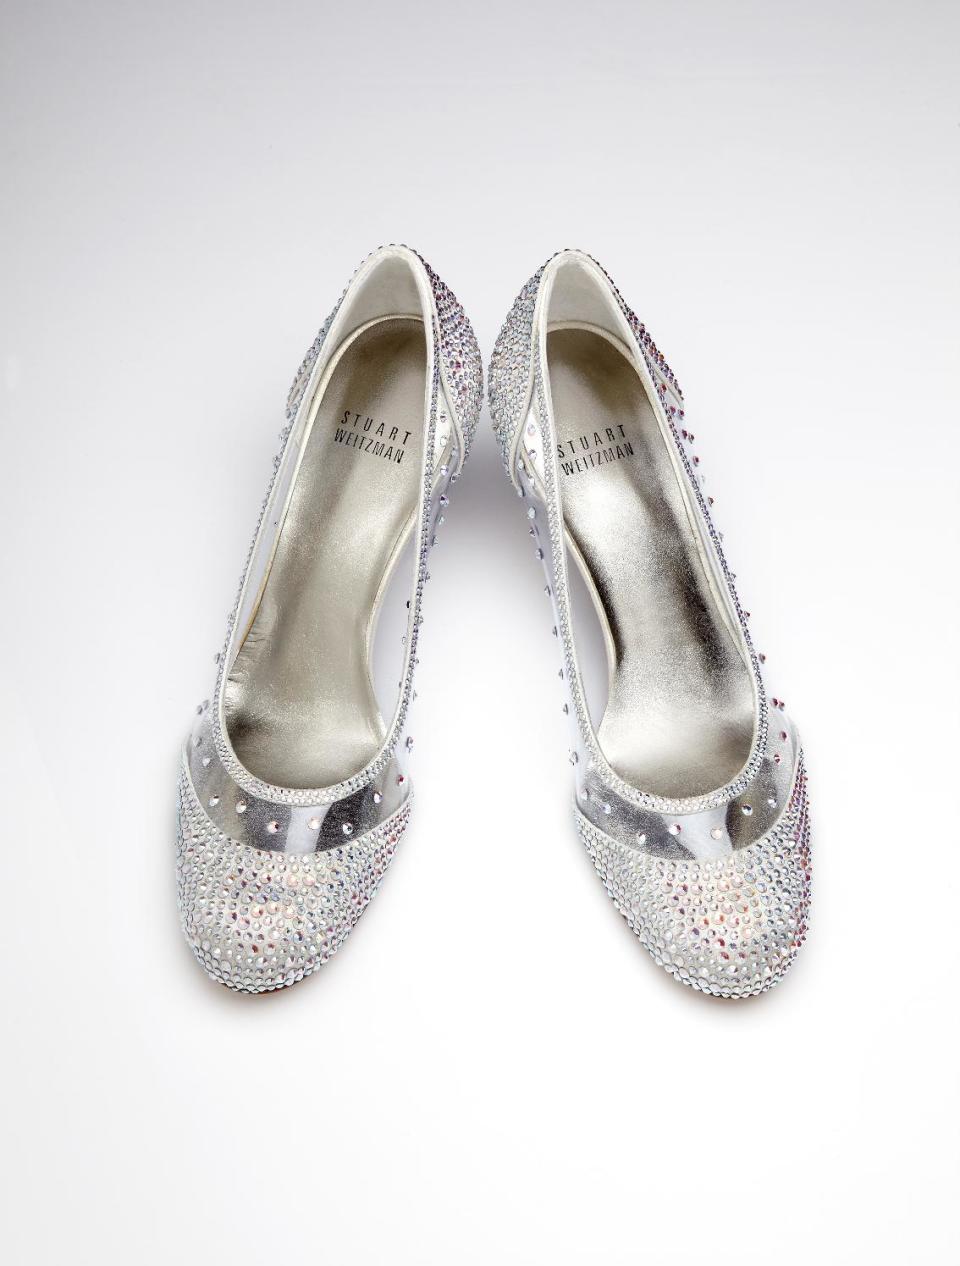 This image released by Stuart Weitzman shows a pair of glass slippers designed by Stuart Weitzman that will be worn by actress Laura Osnes in the title role of the Broadway musical, "Rodgers + Hammerstein's Cinderella on Broadway." Weitzman knows how to make shoes that make a splash. For years, he made the “million-dollar Oscar shoes,” diamond-covered footwear that a celebrity would wear to the Academy Awards. He employed a welded-construction technique that uses no screws so that Cinderella could have a seamless look. (AP Photo/Stuart Weitzman )